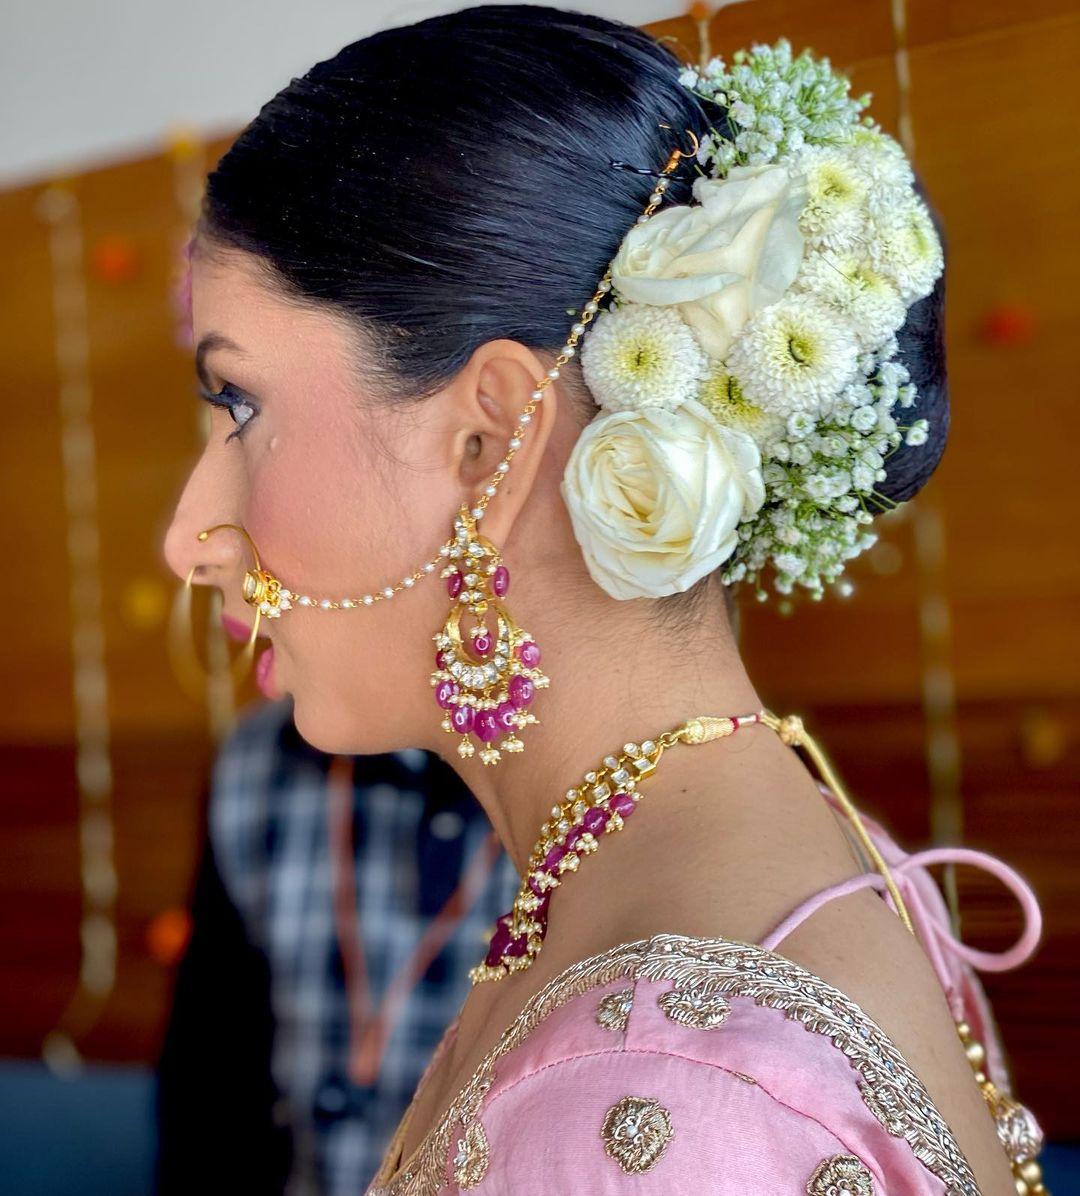 Indian Wedding Hairstyles: What to Know Beyond the Obvious